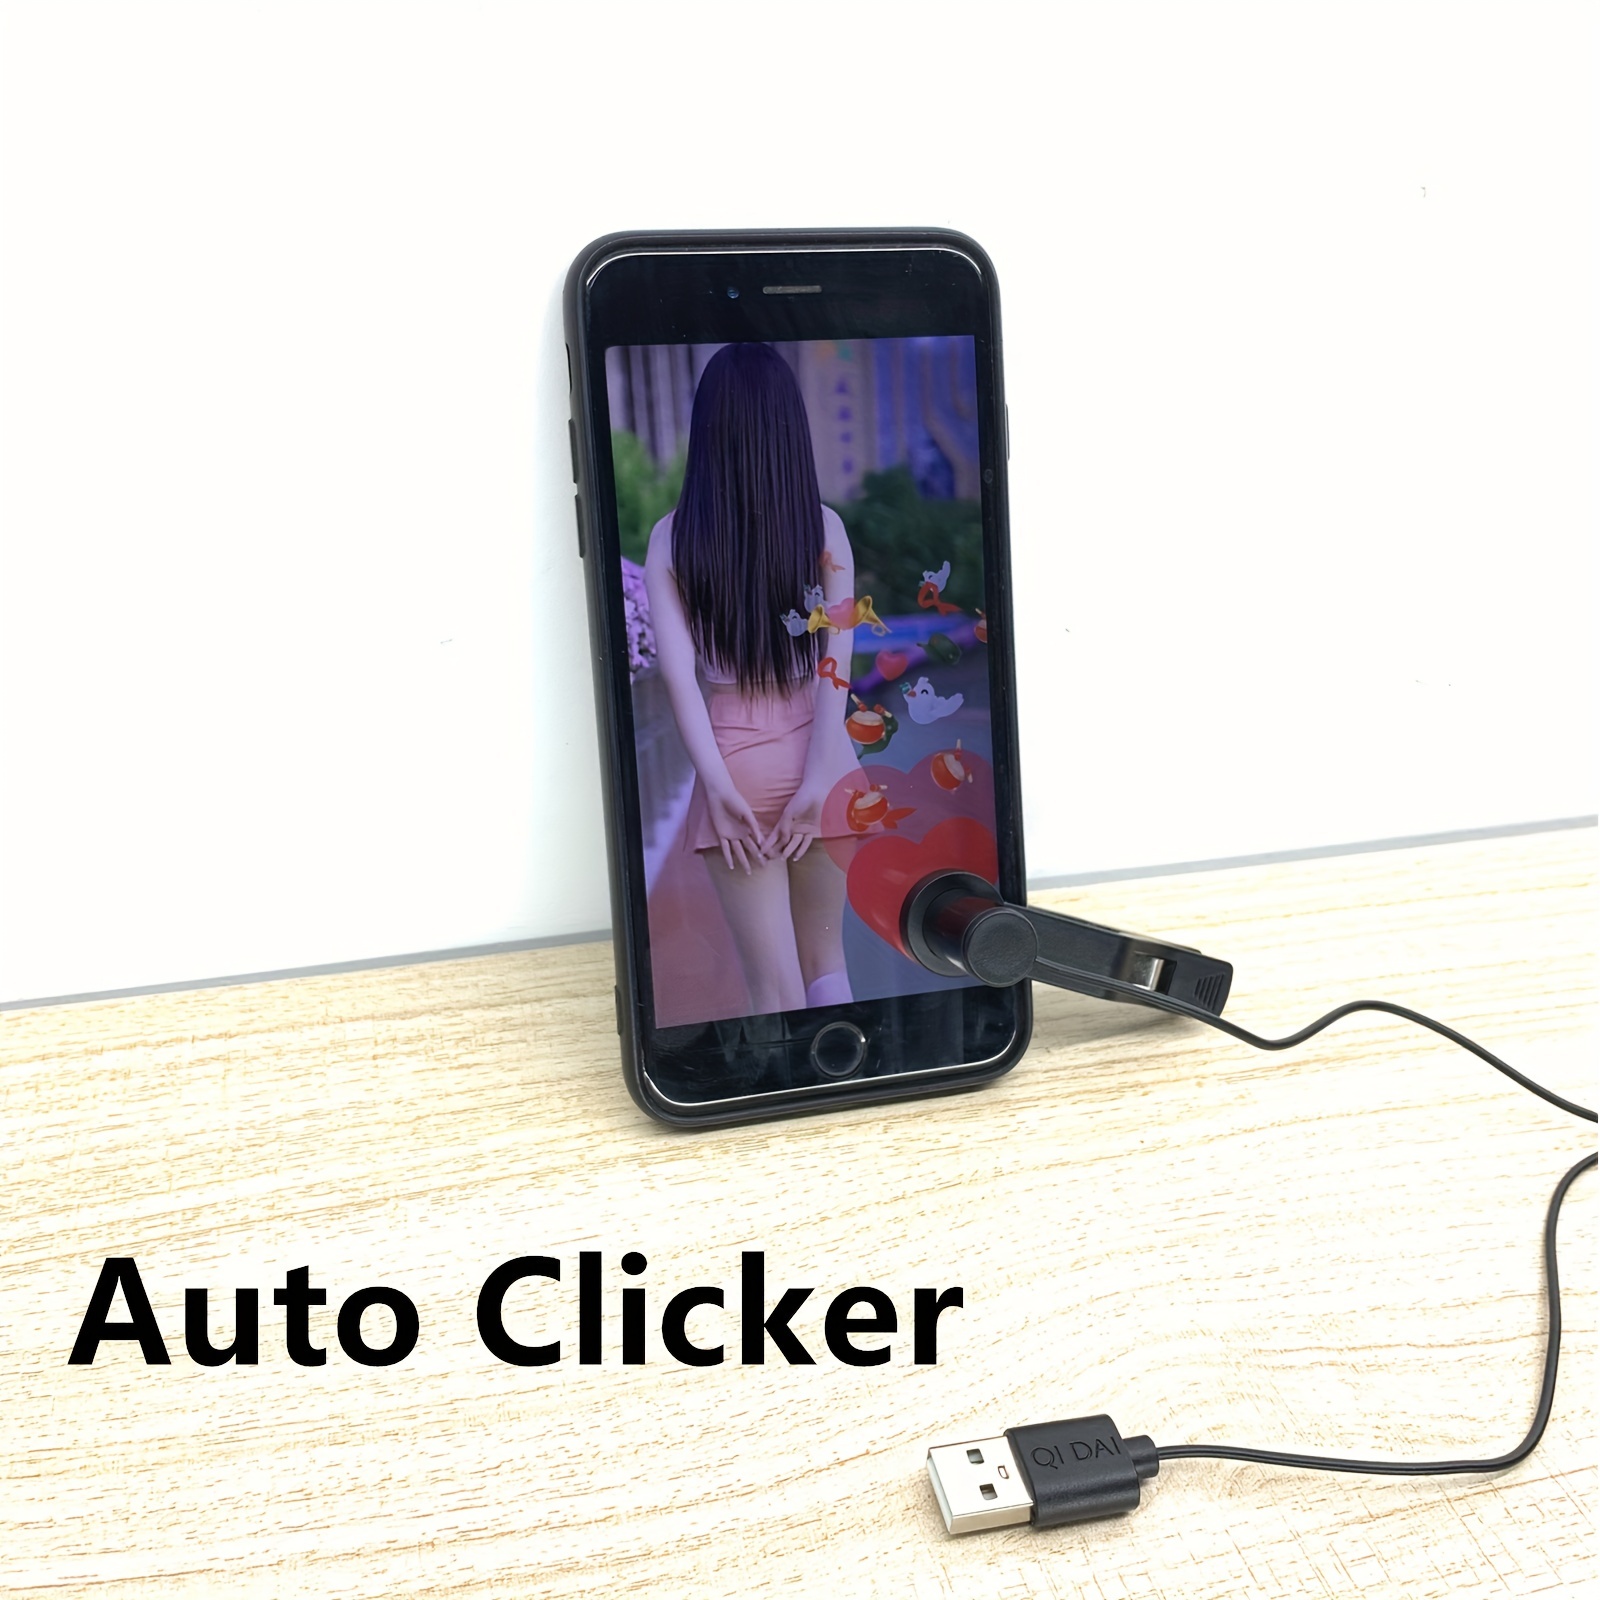 OP Auto Clicker for iOS Devices [iPad, iPhone] 100% Working